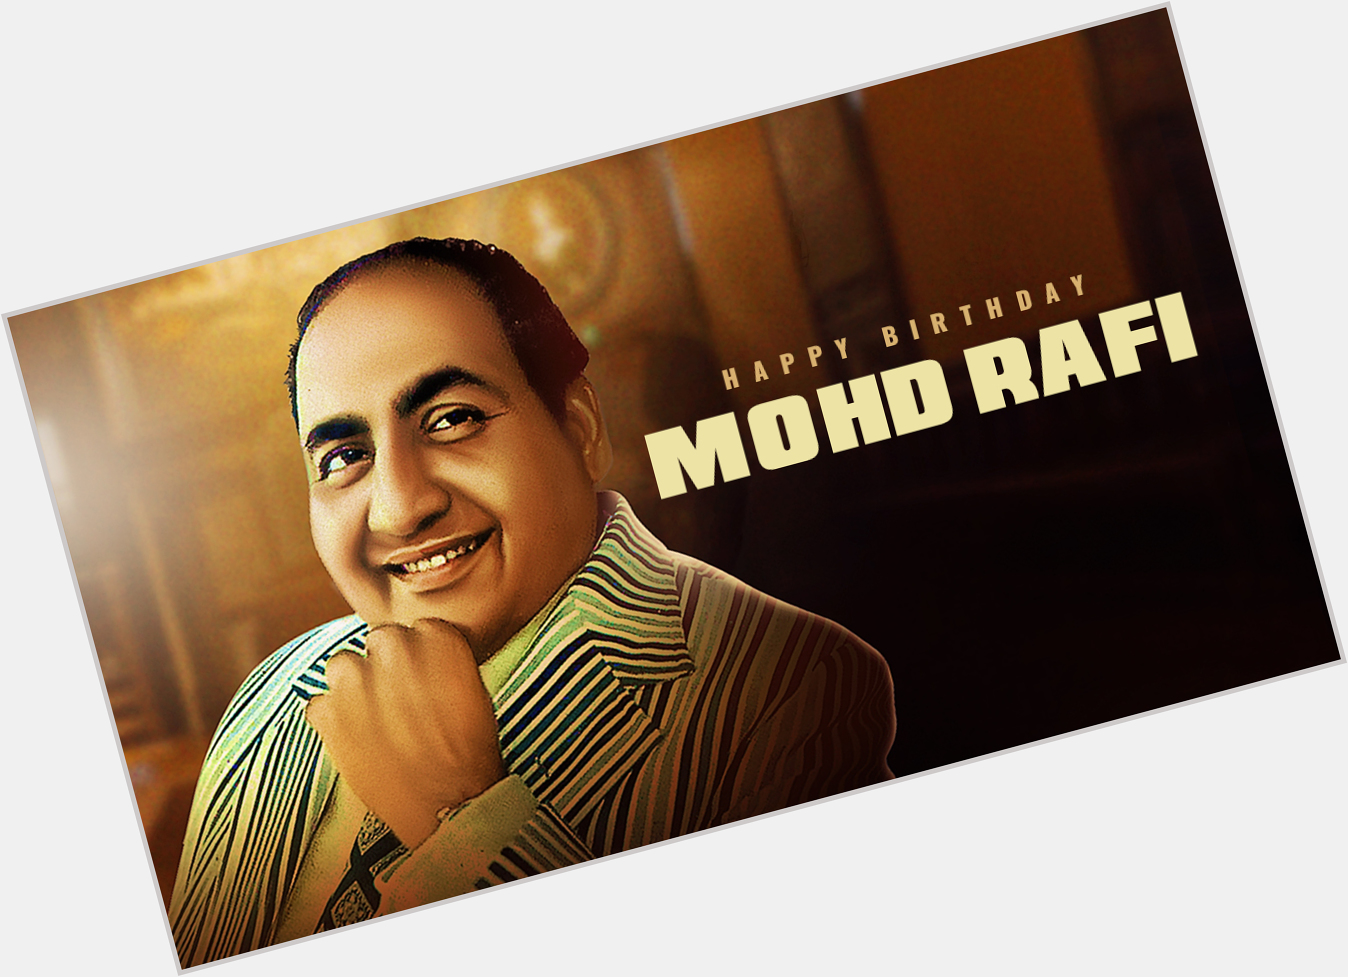 Mohammad Rafi exclusive hot pic 5.jpg